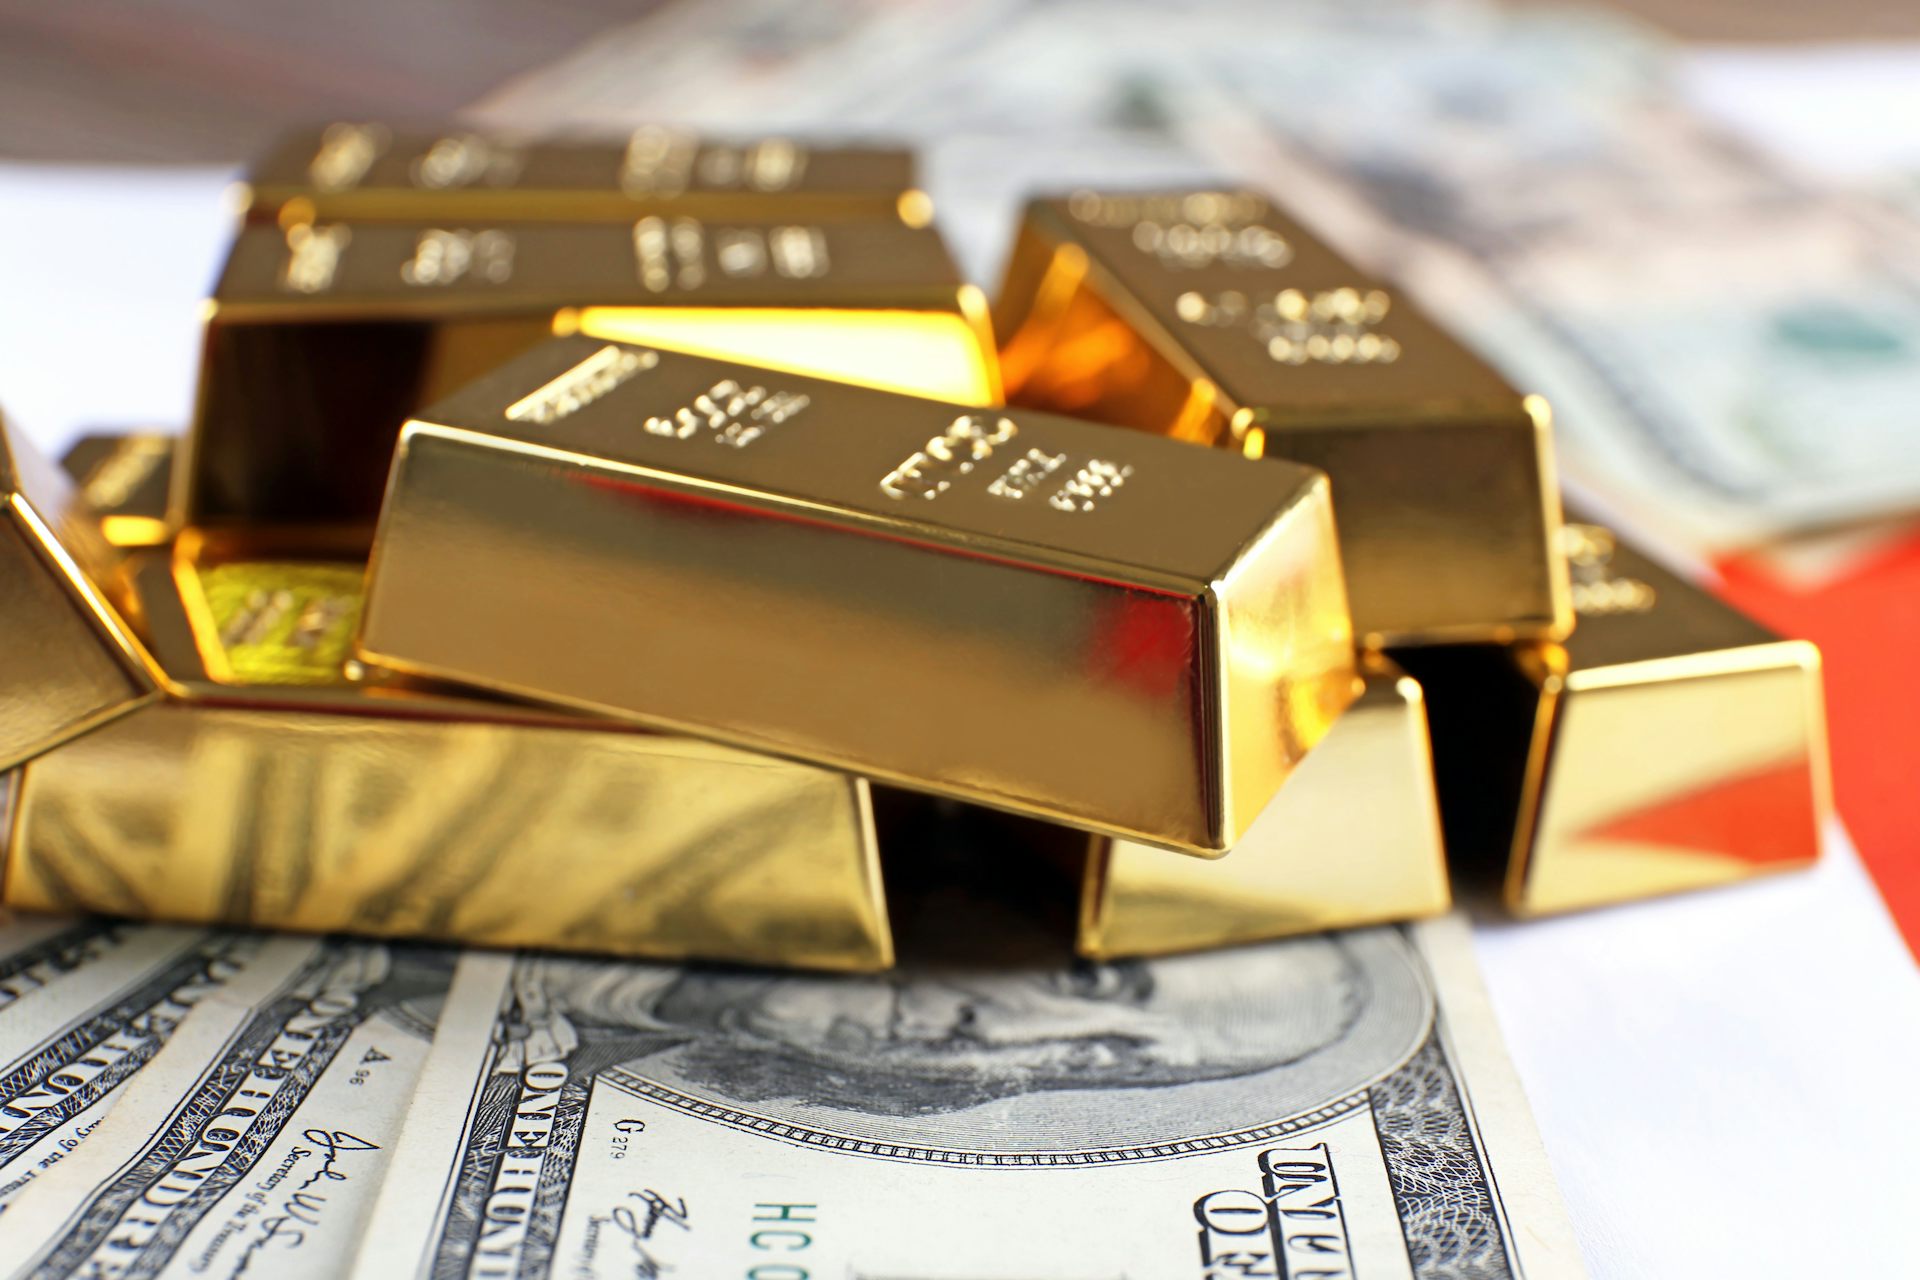 An image of several gold bars lying on top of US dollar notes